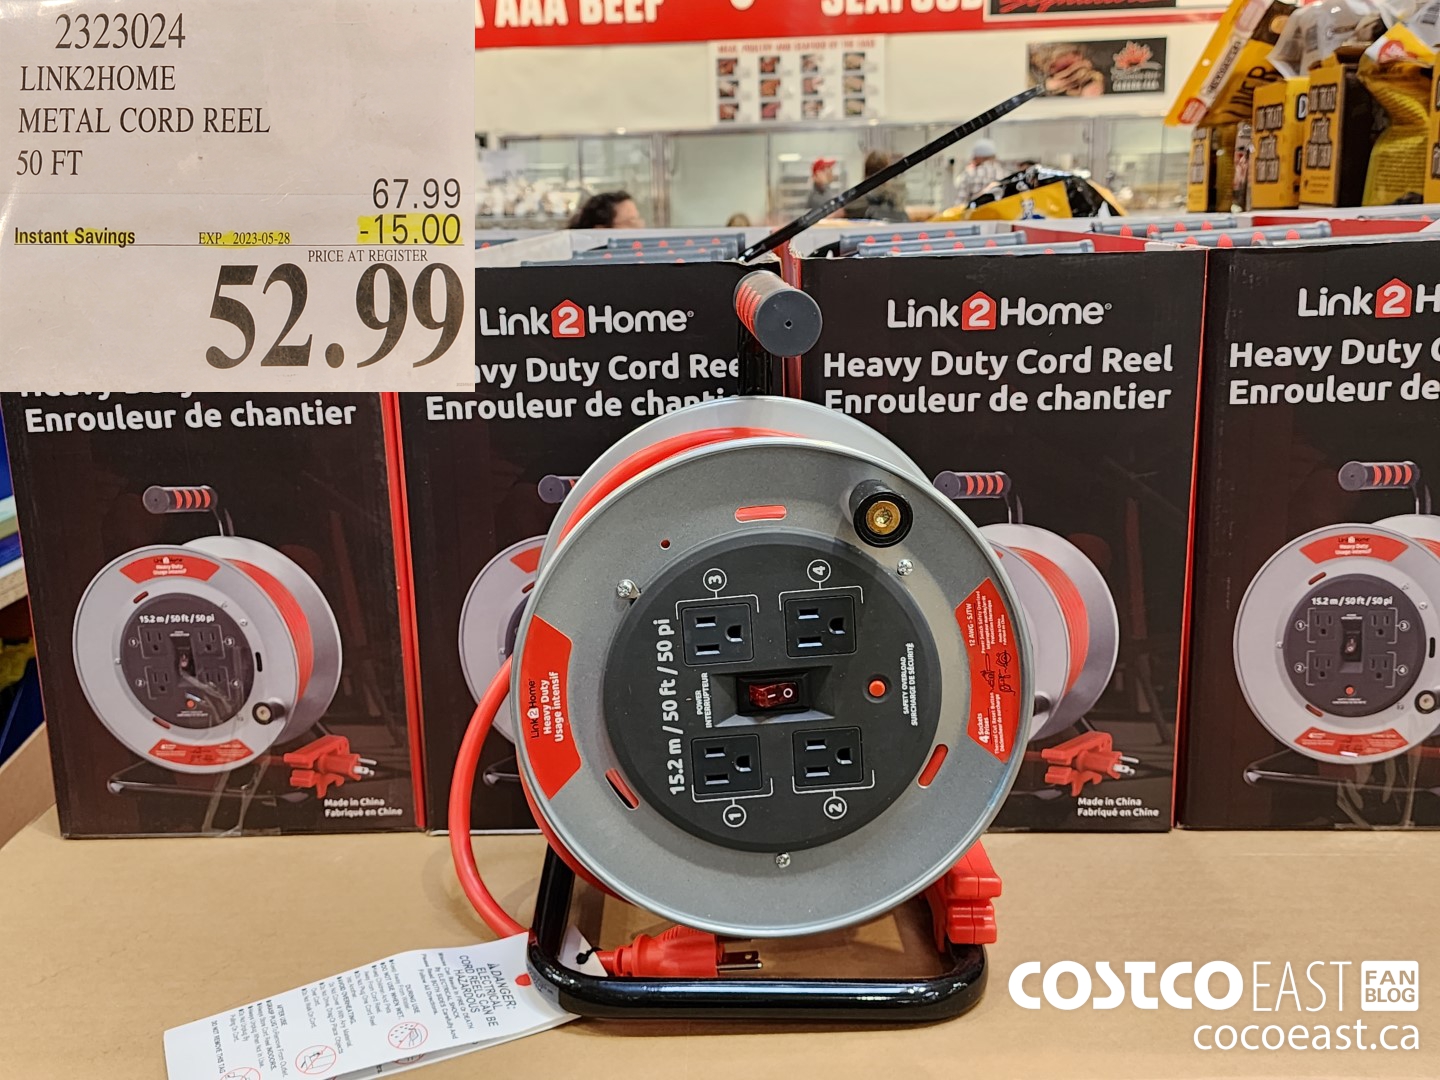 Costco Sale Item Review Link 2 Home 50' ft Heavy Duty Extension